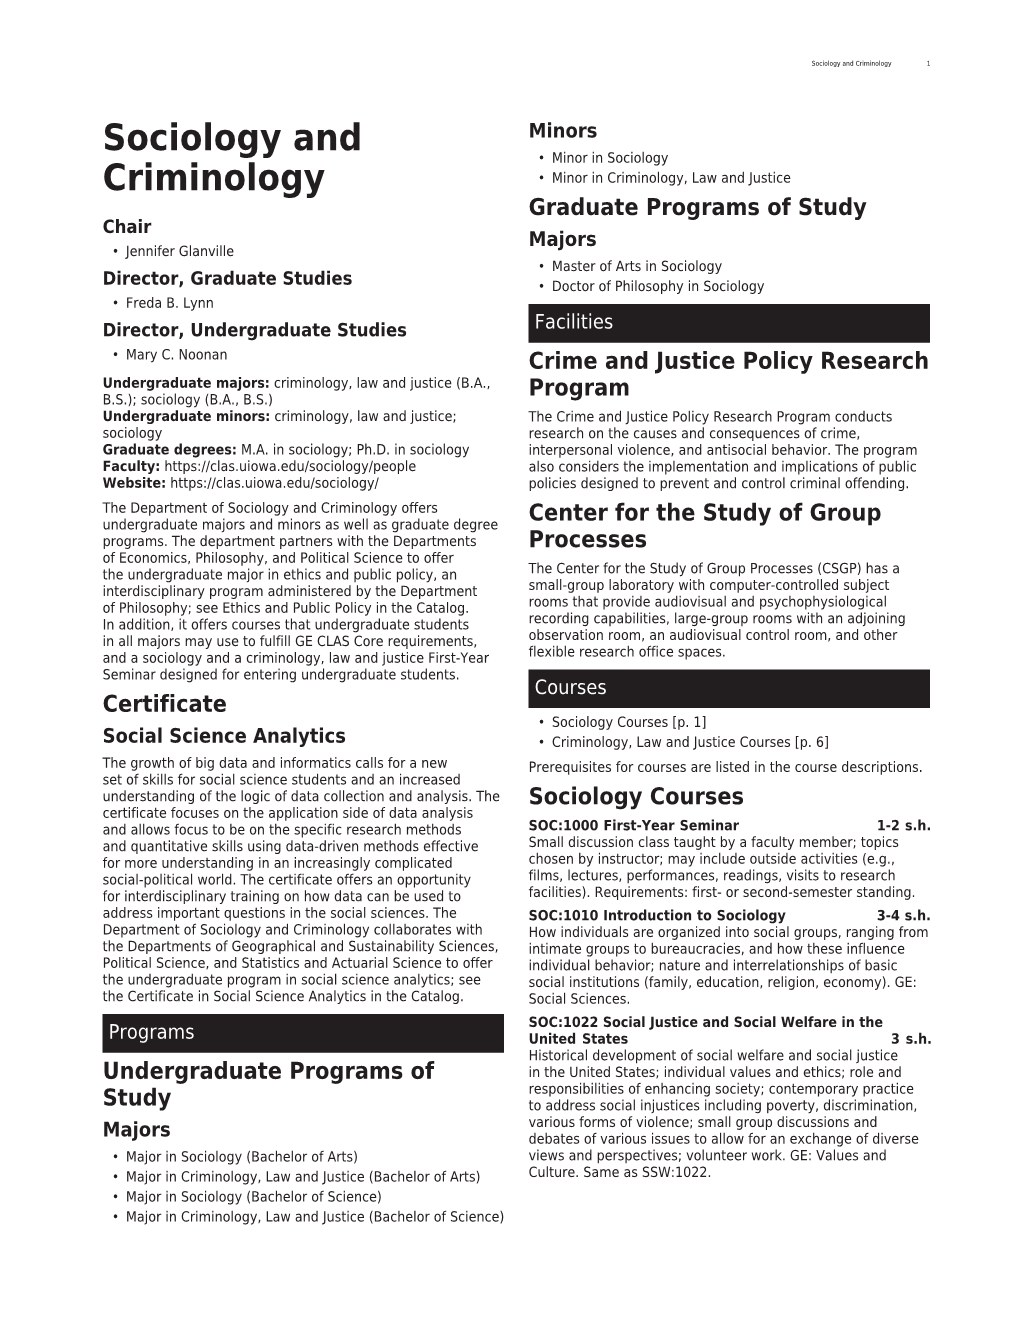 Sociology and Criminology 1